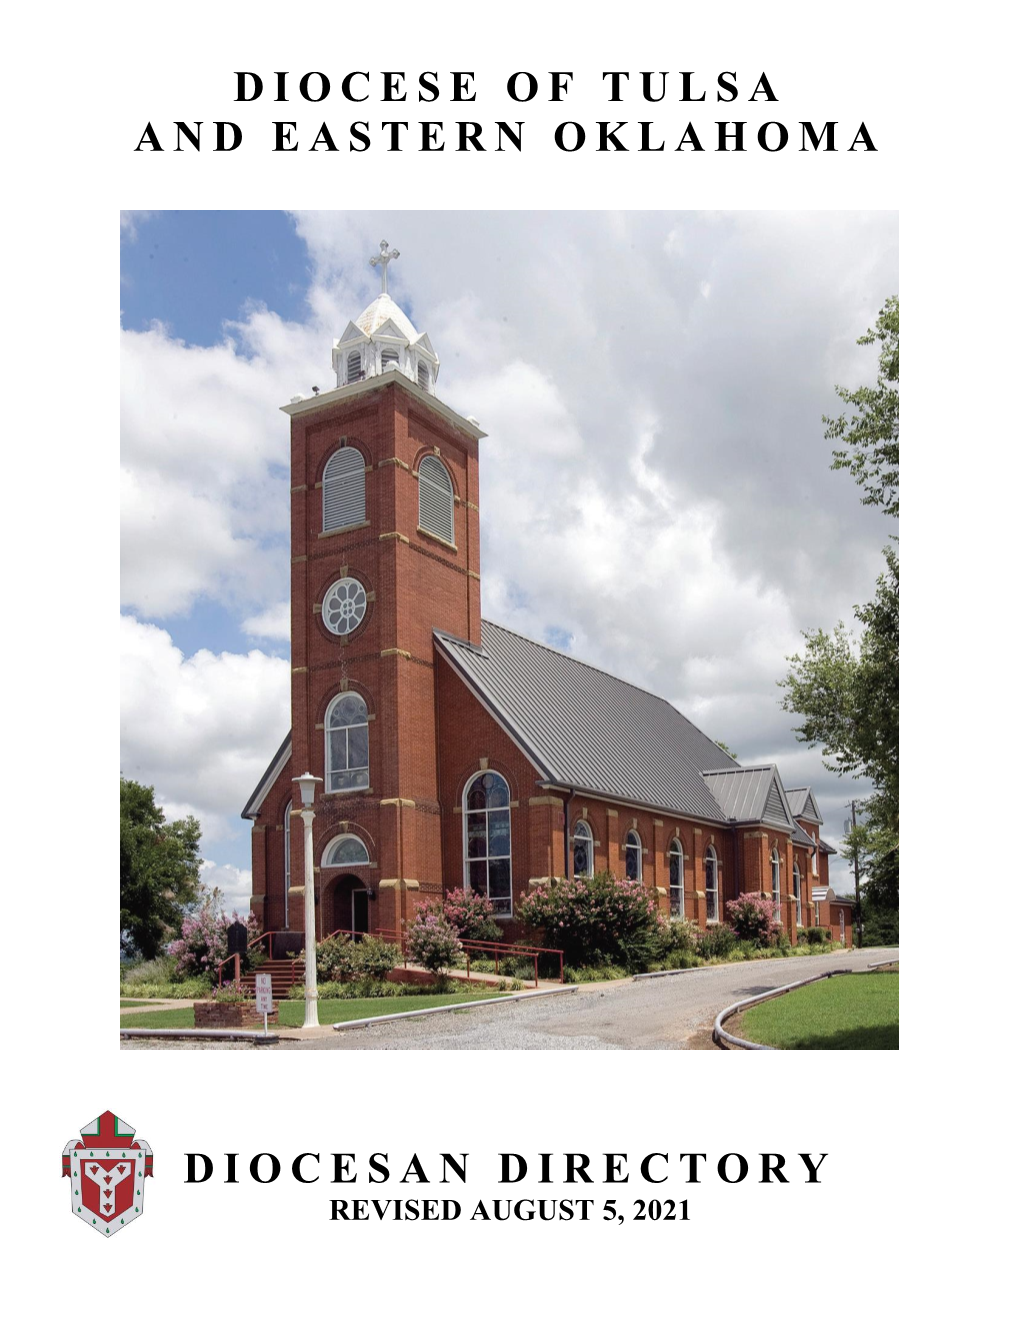 Diocesan Directory Revised August 5, 2021